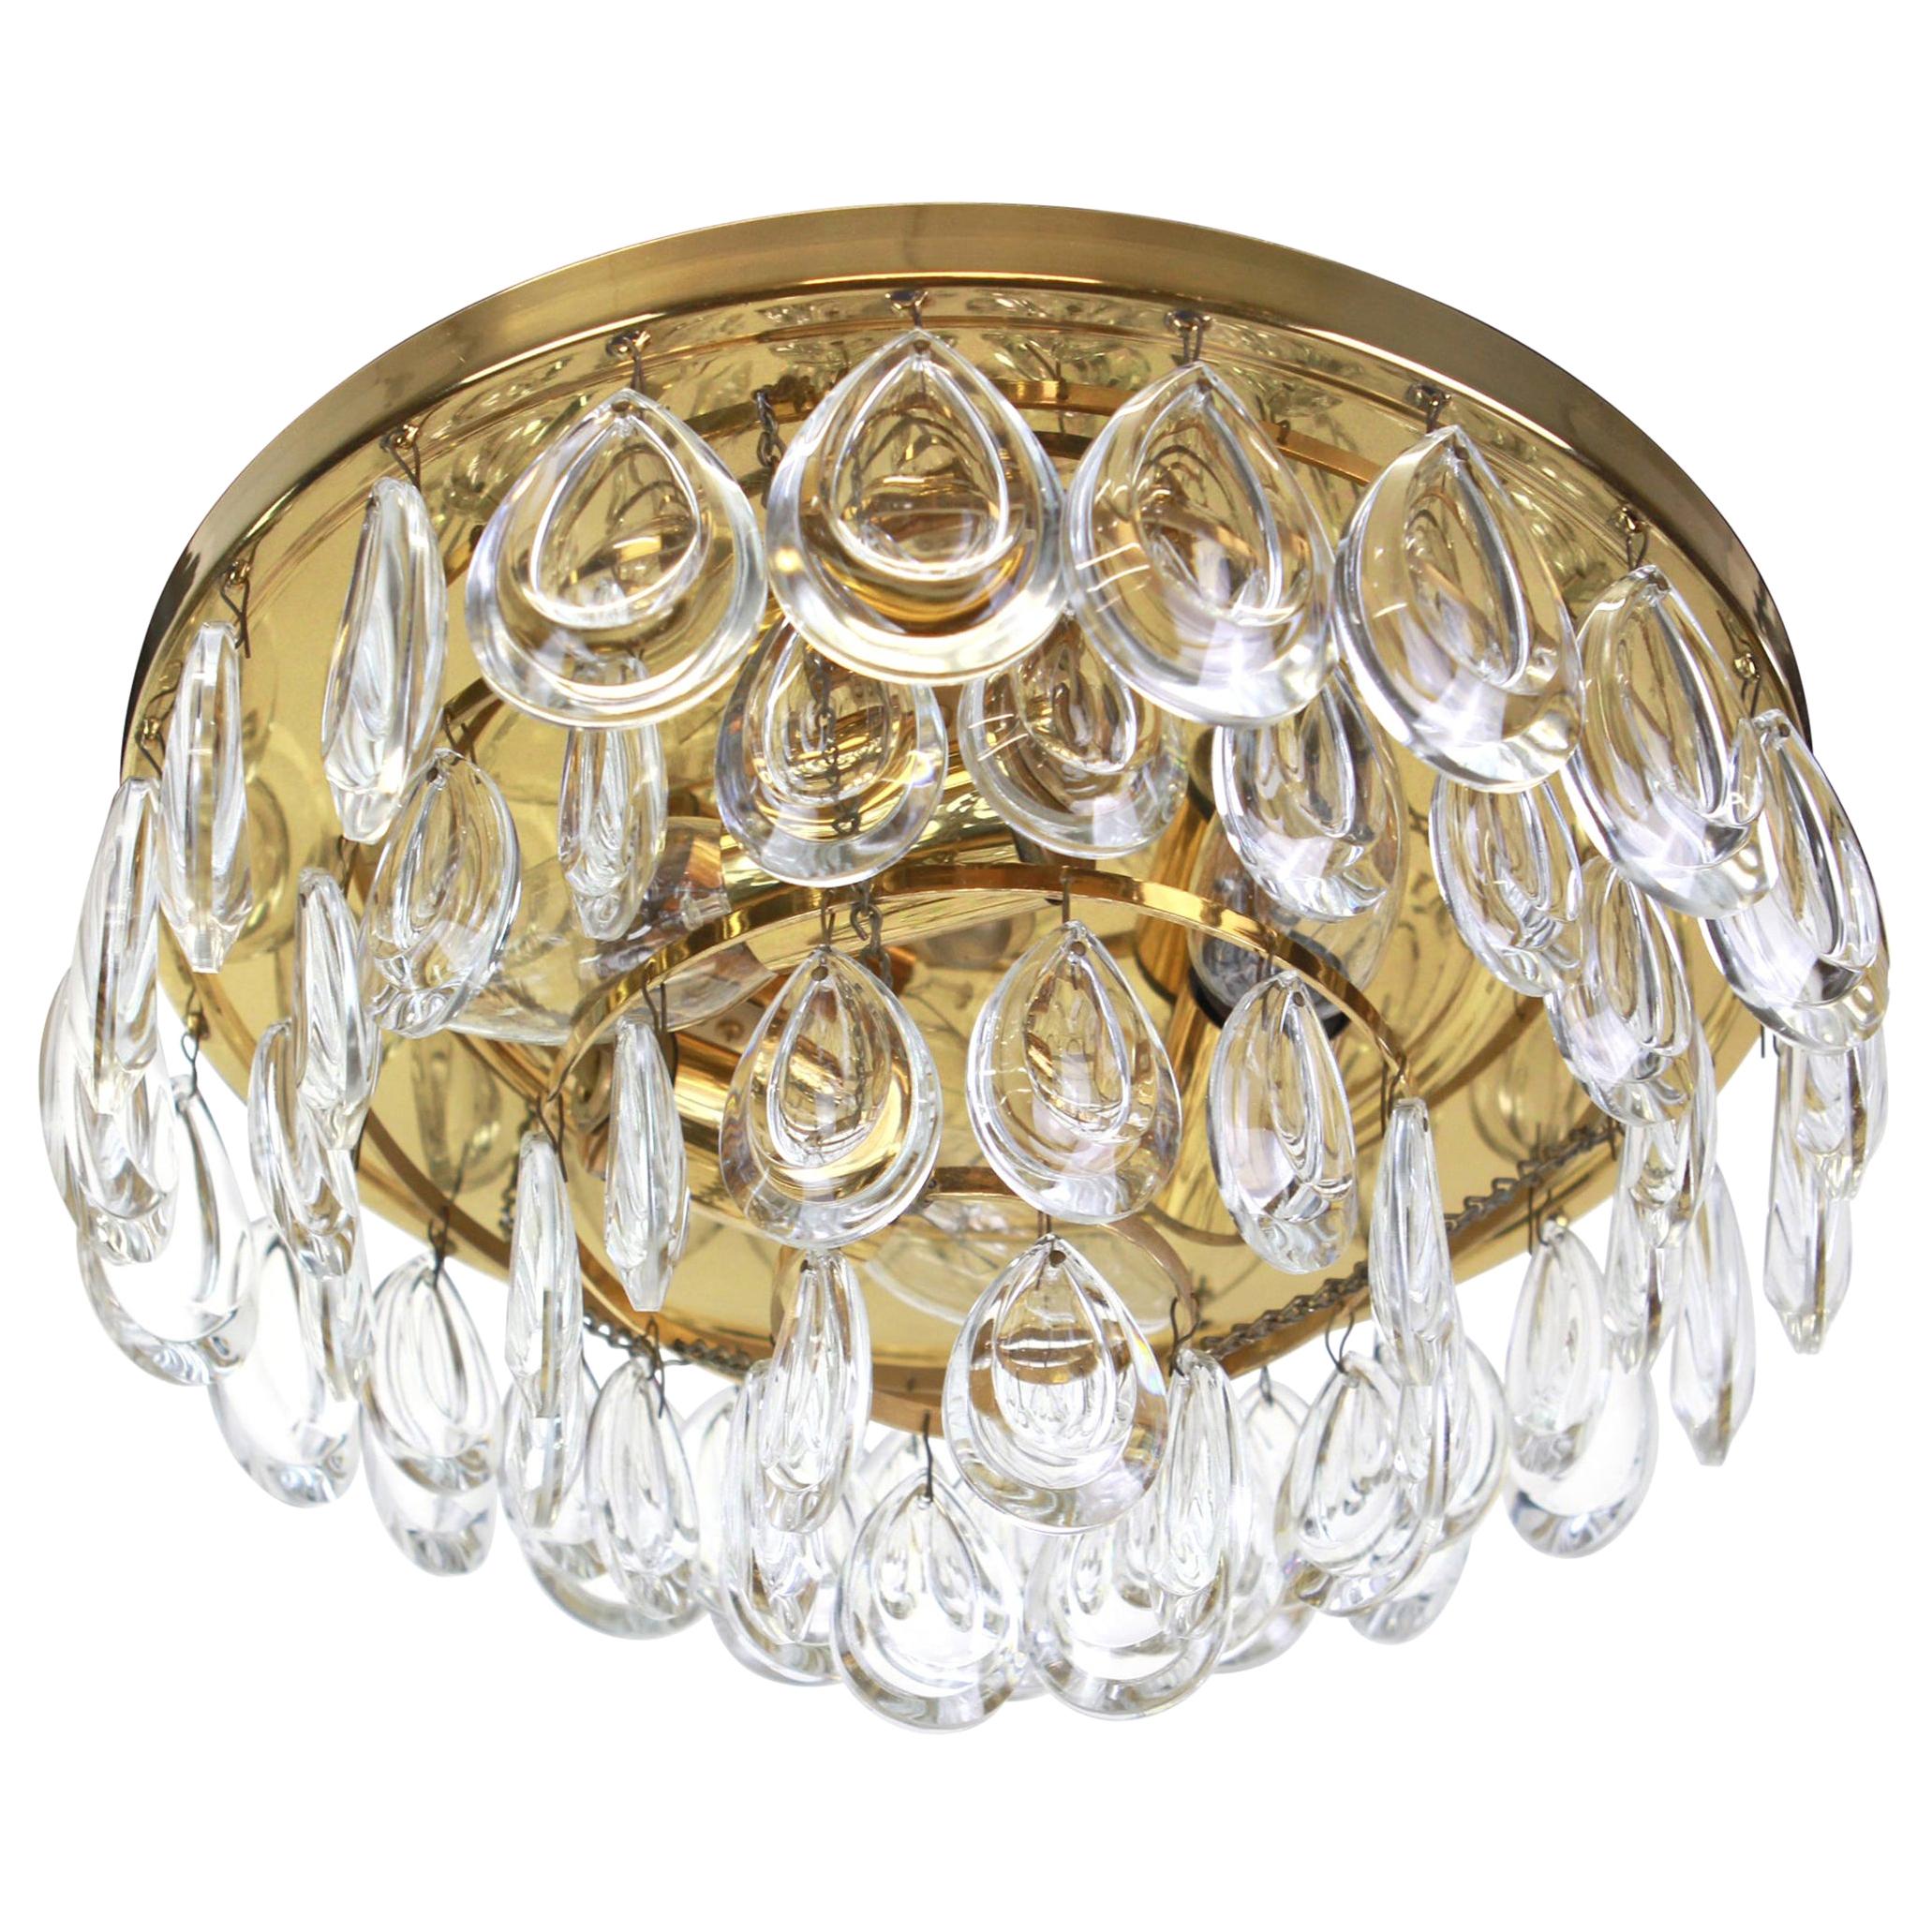 1 of 2 Stunning Flushmount, Brass and Crystal Glass by Palwa, Germany, 1970